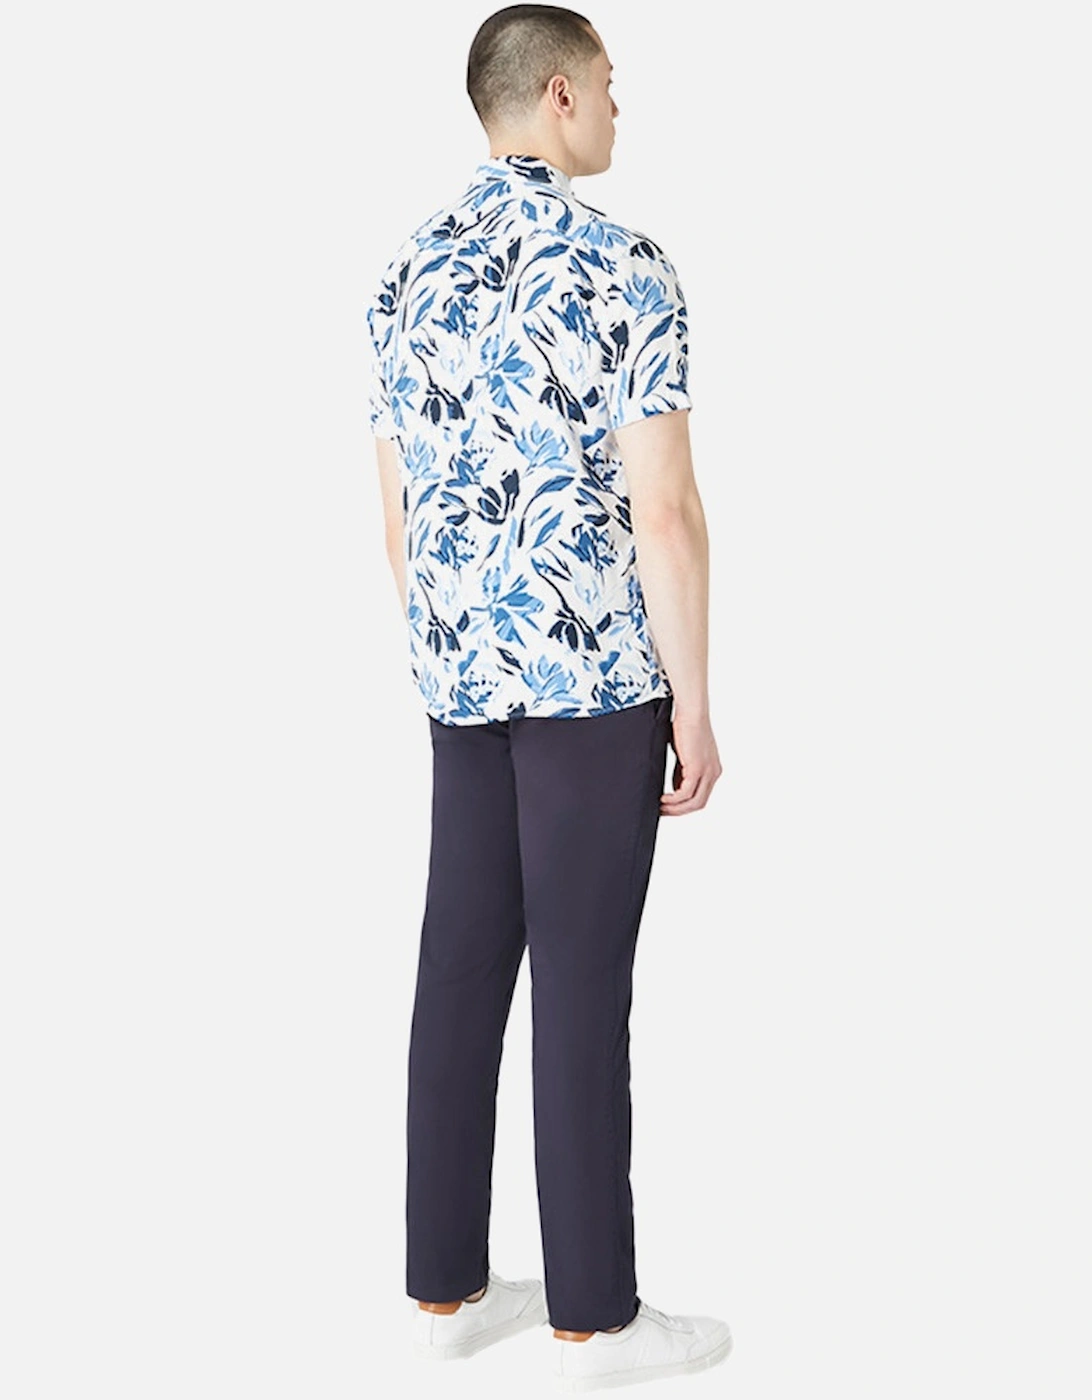 Mens Paolo Leaf Print Pattern S/S Shirt (White/Navy)